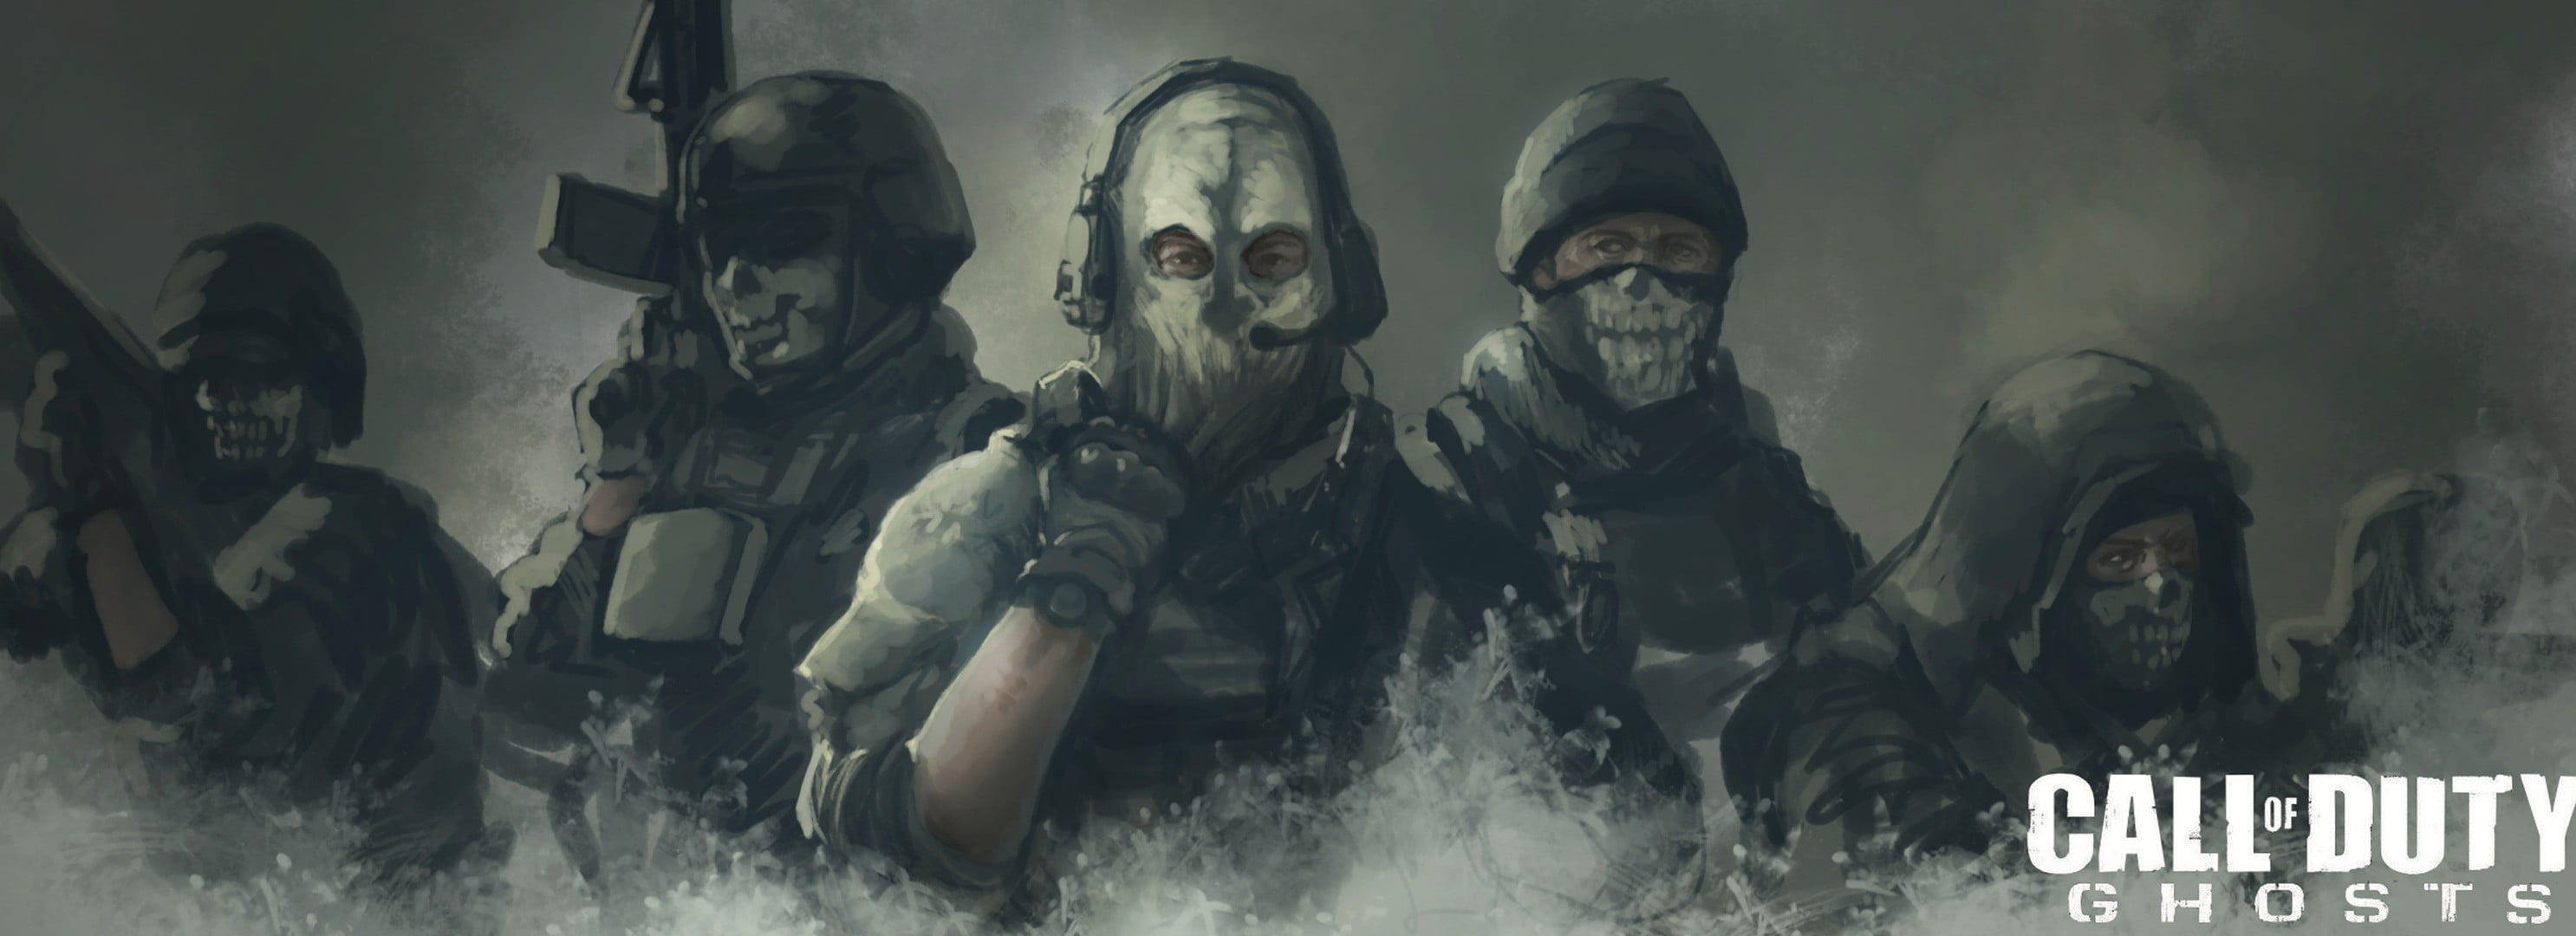 Call Of Duty Ghosts wallpaper, video